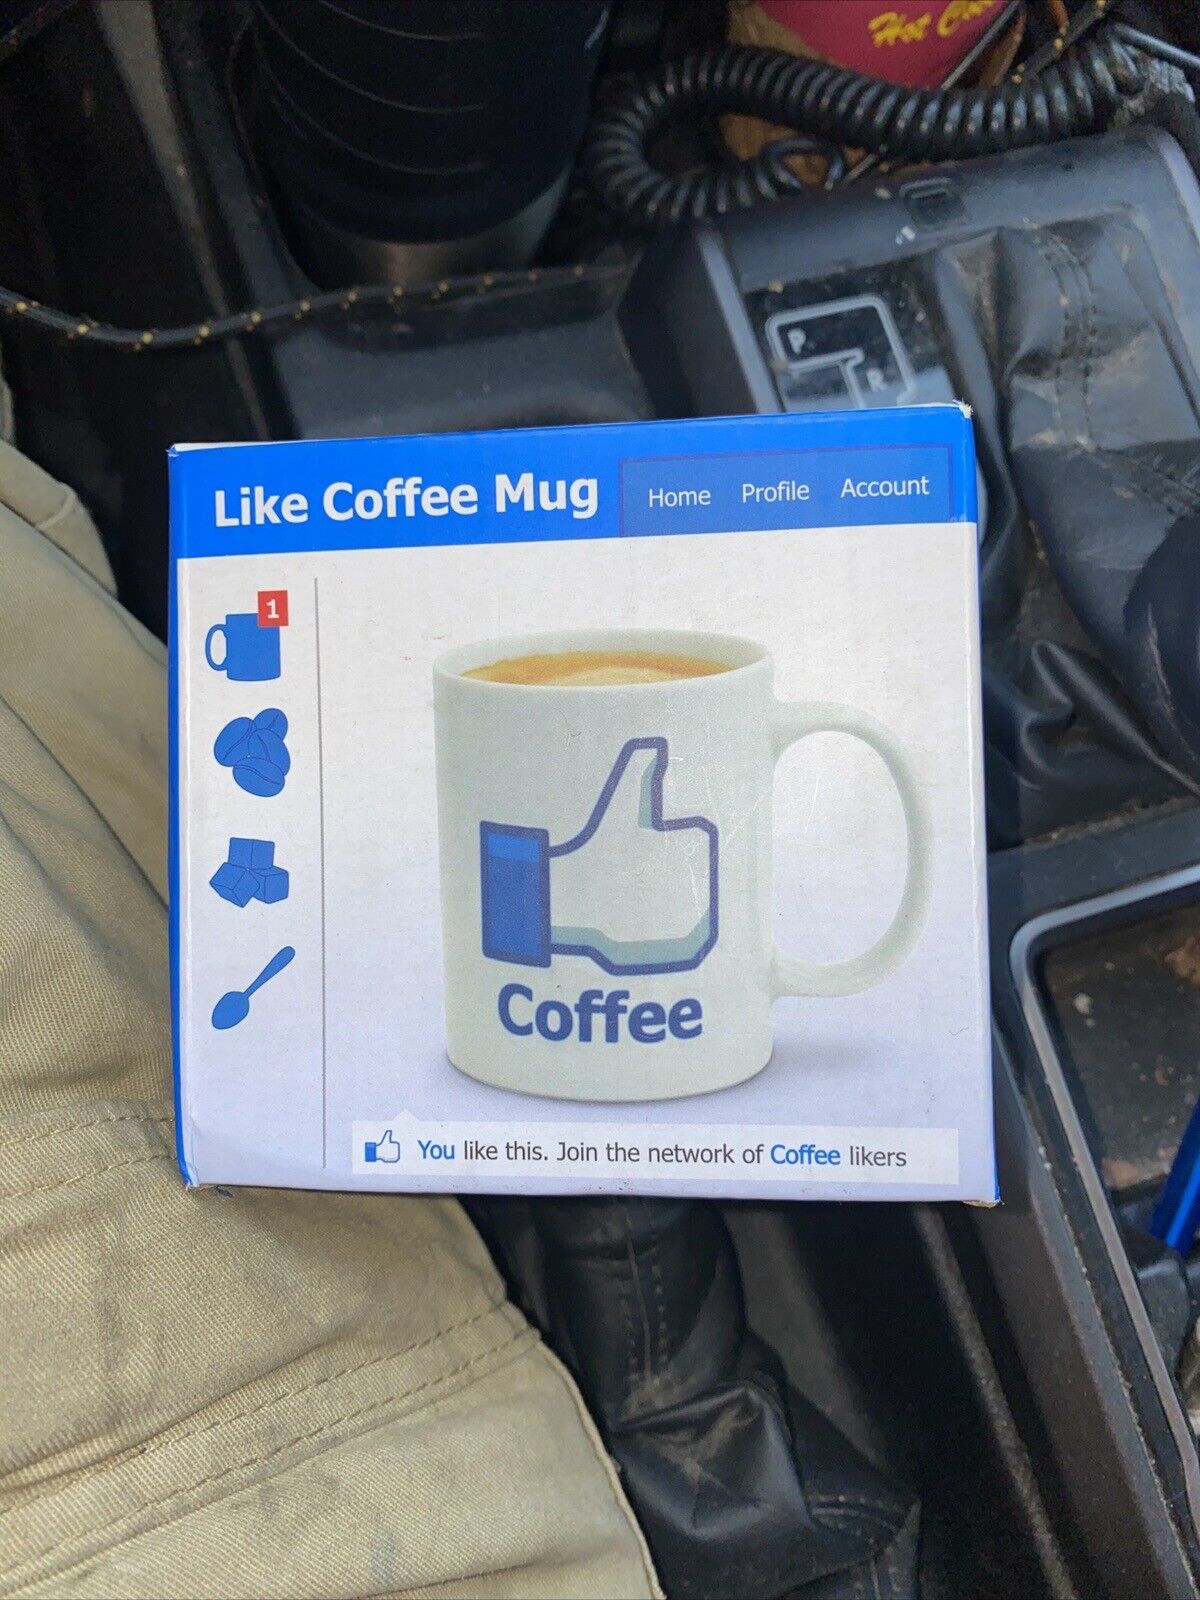 Facebook Social Media Thumbs-Up Icon Double Sided Ceramic Coffee Mug Cup In Box 